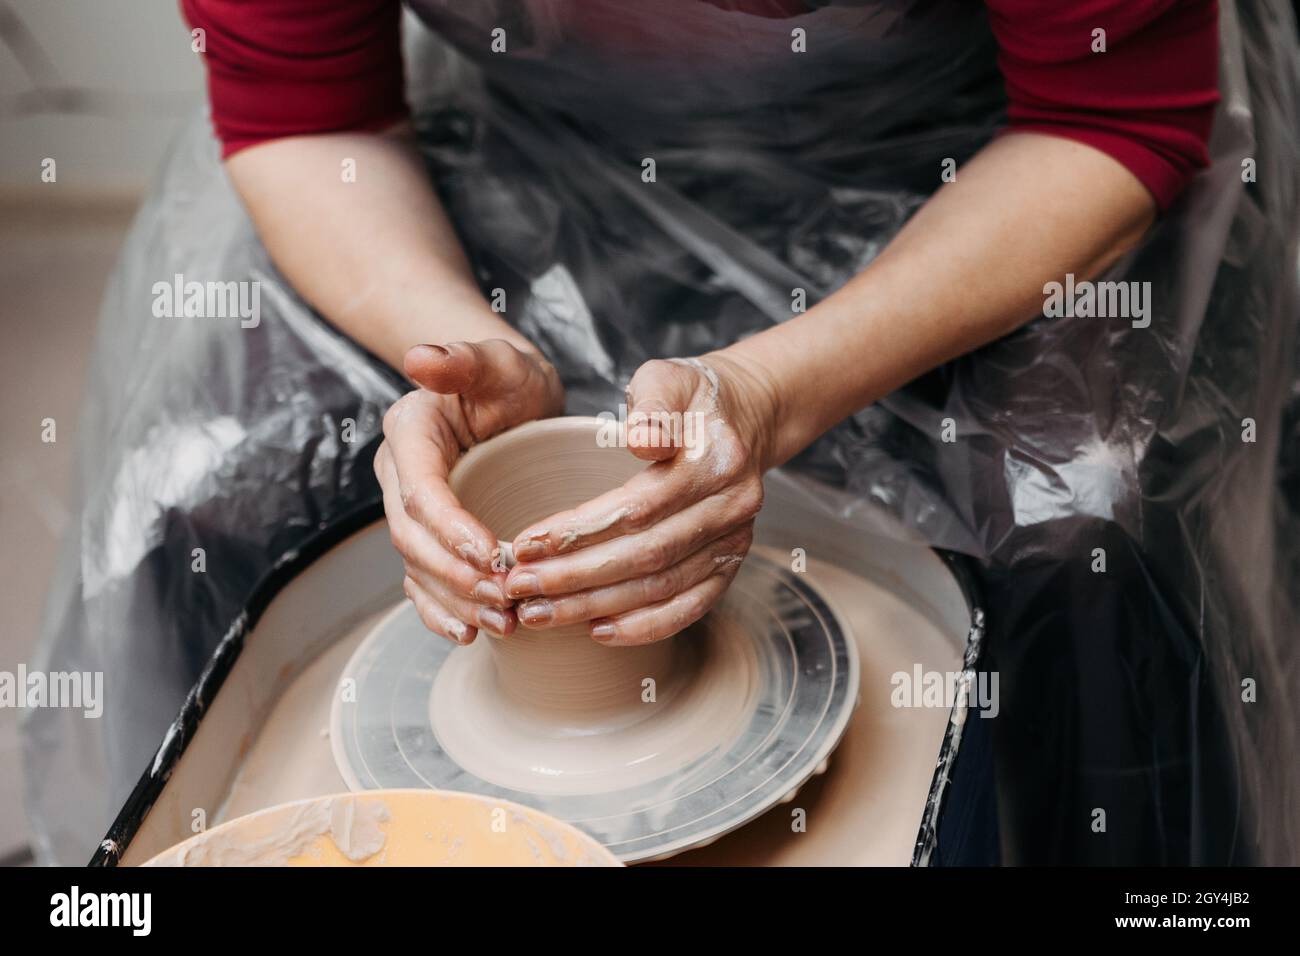 Best Kinda Therapy Unrecognizable Woman Molding Clay Pottery Wheel Stock  Photo by ©PeopleImages.com 657966250